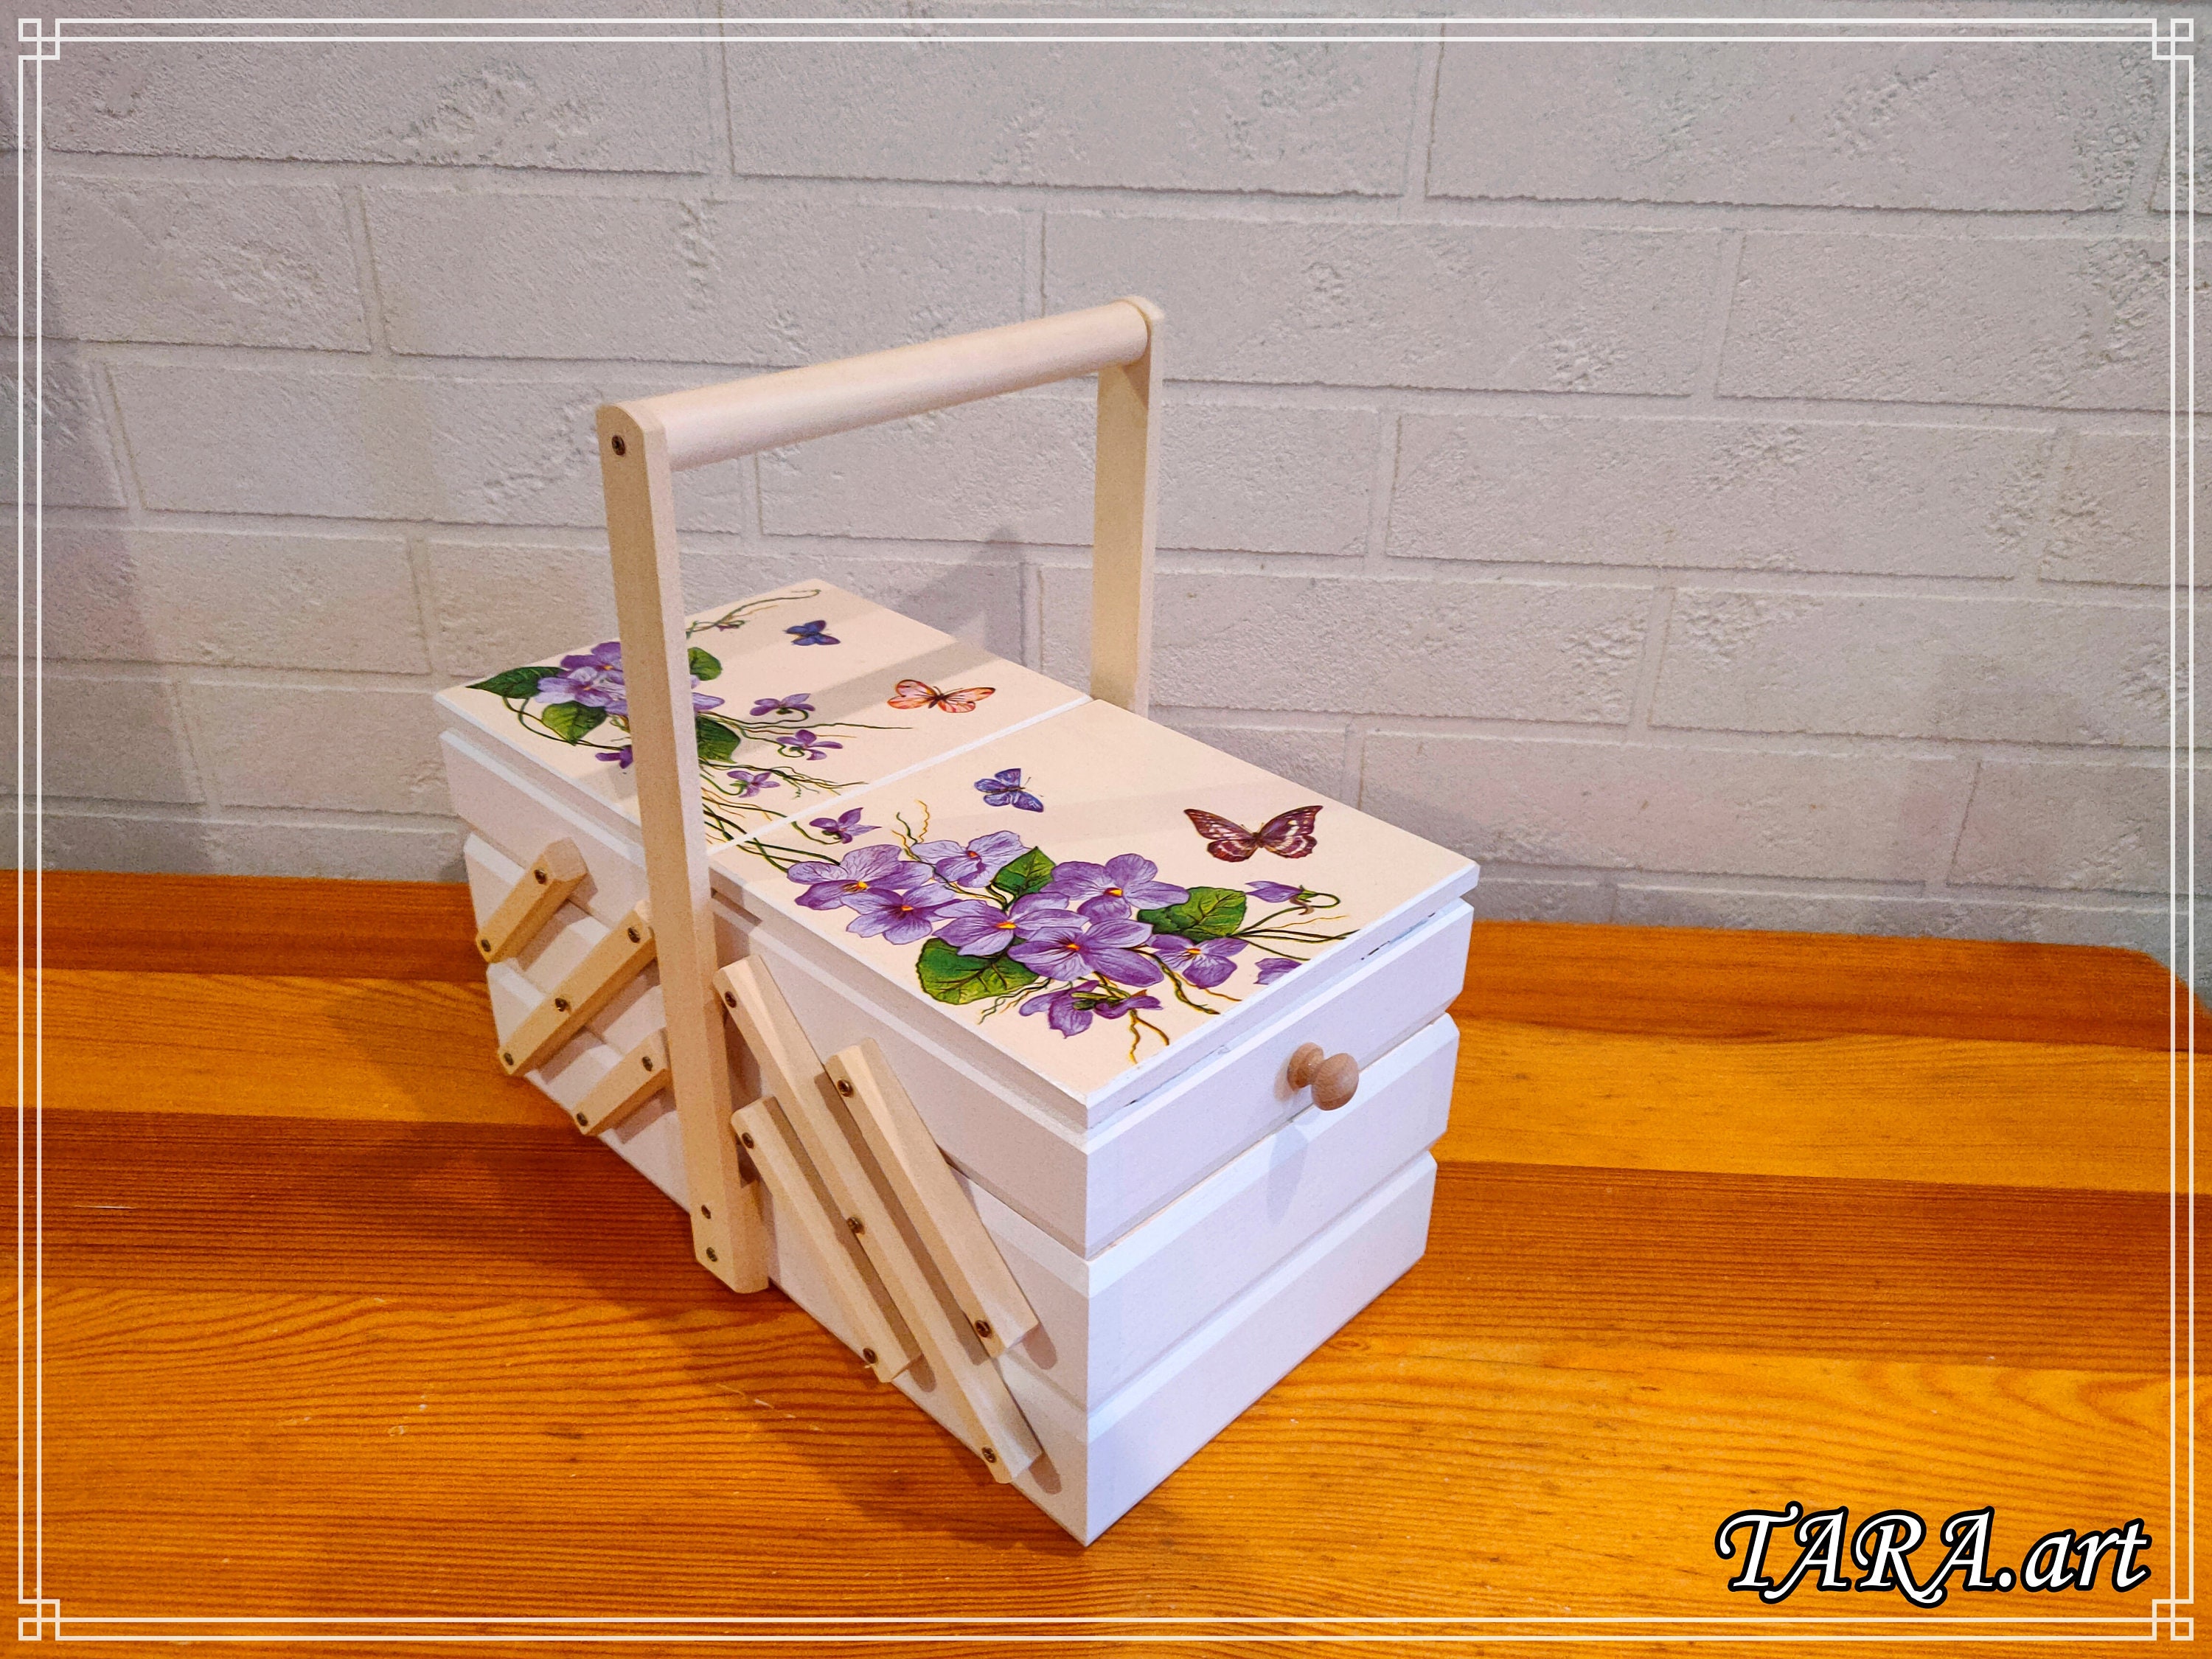 Wooden Sewing Box, Storage Box for Art Supplies, Accordion Sewing Box,  Cantilevered Sewing Basket, Folding Organizer, Violet Field Flowers 